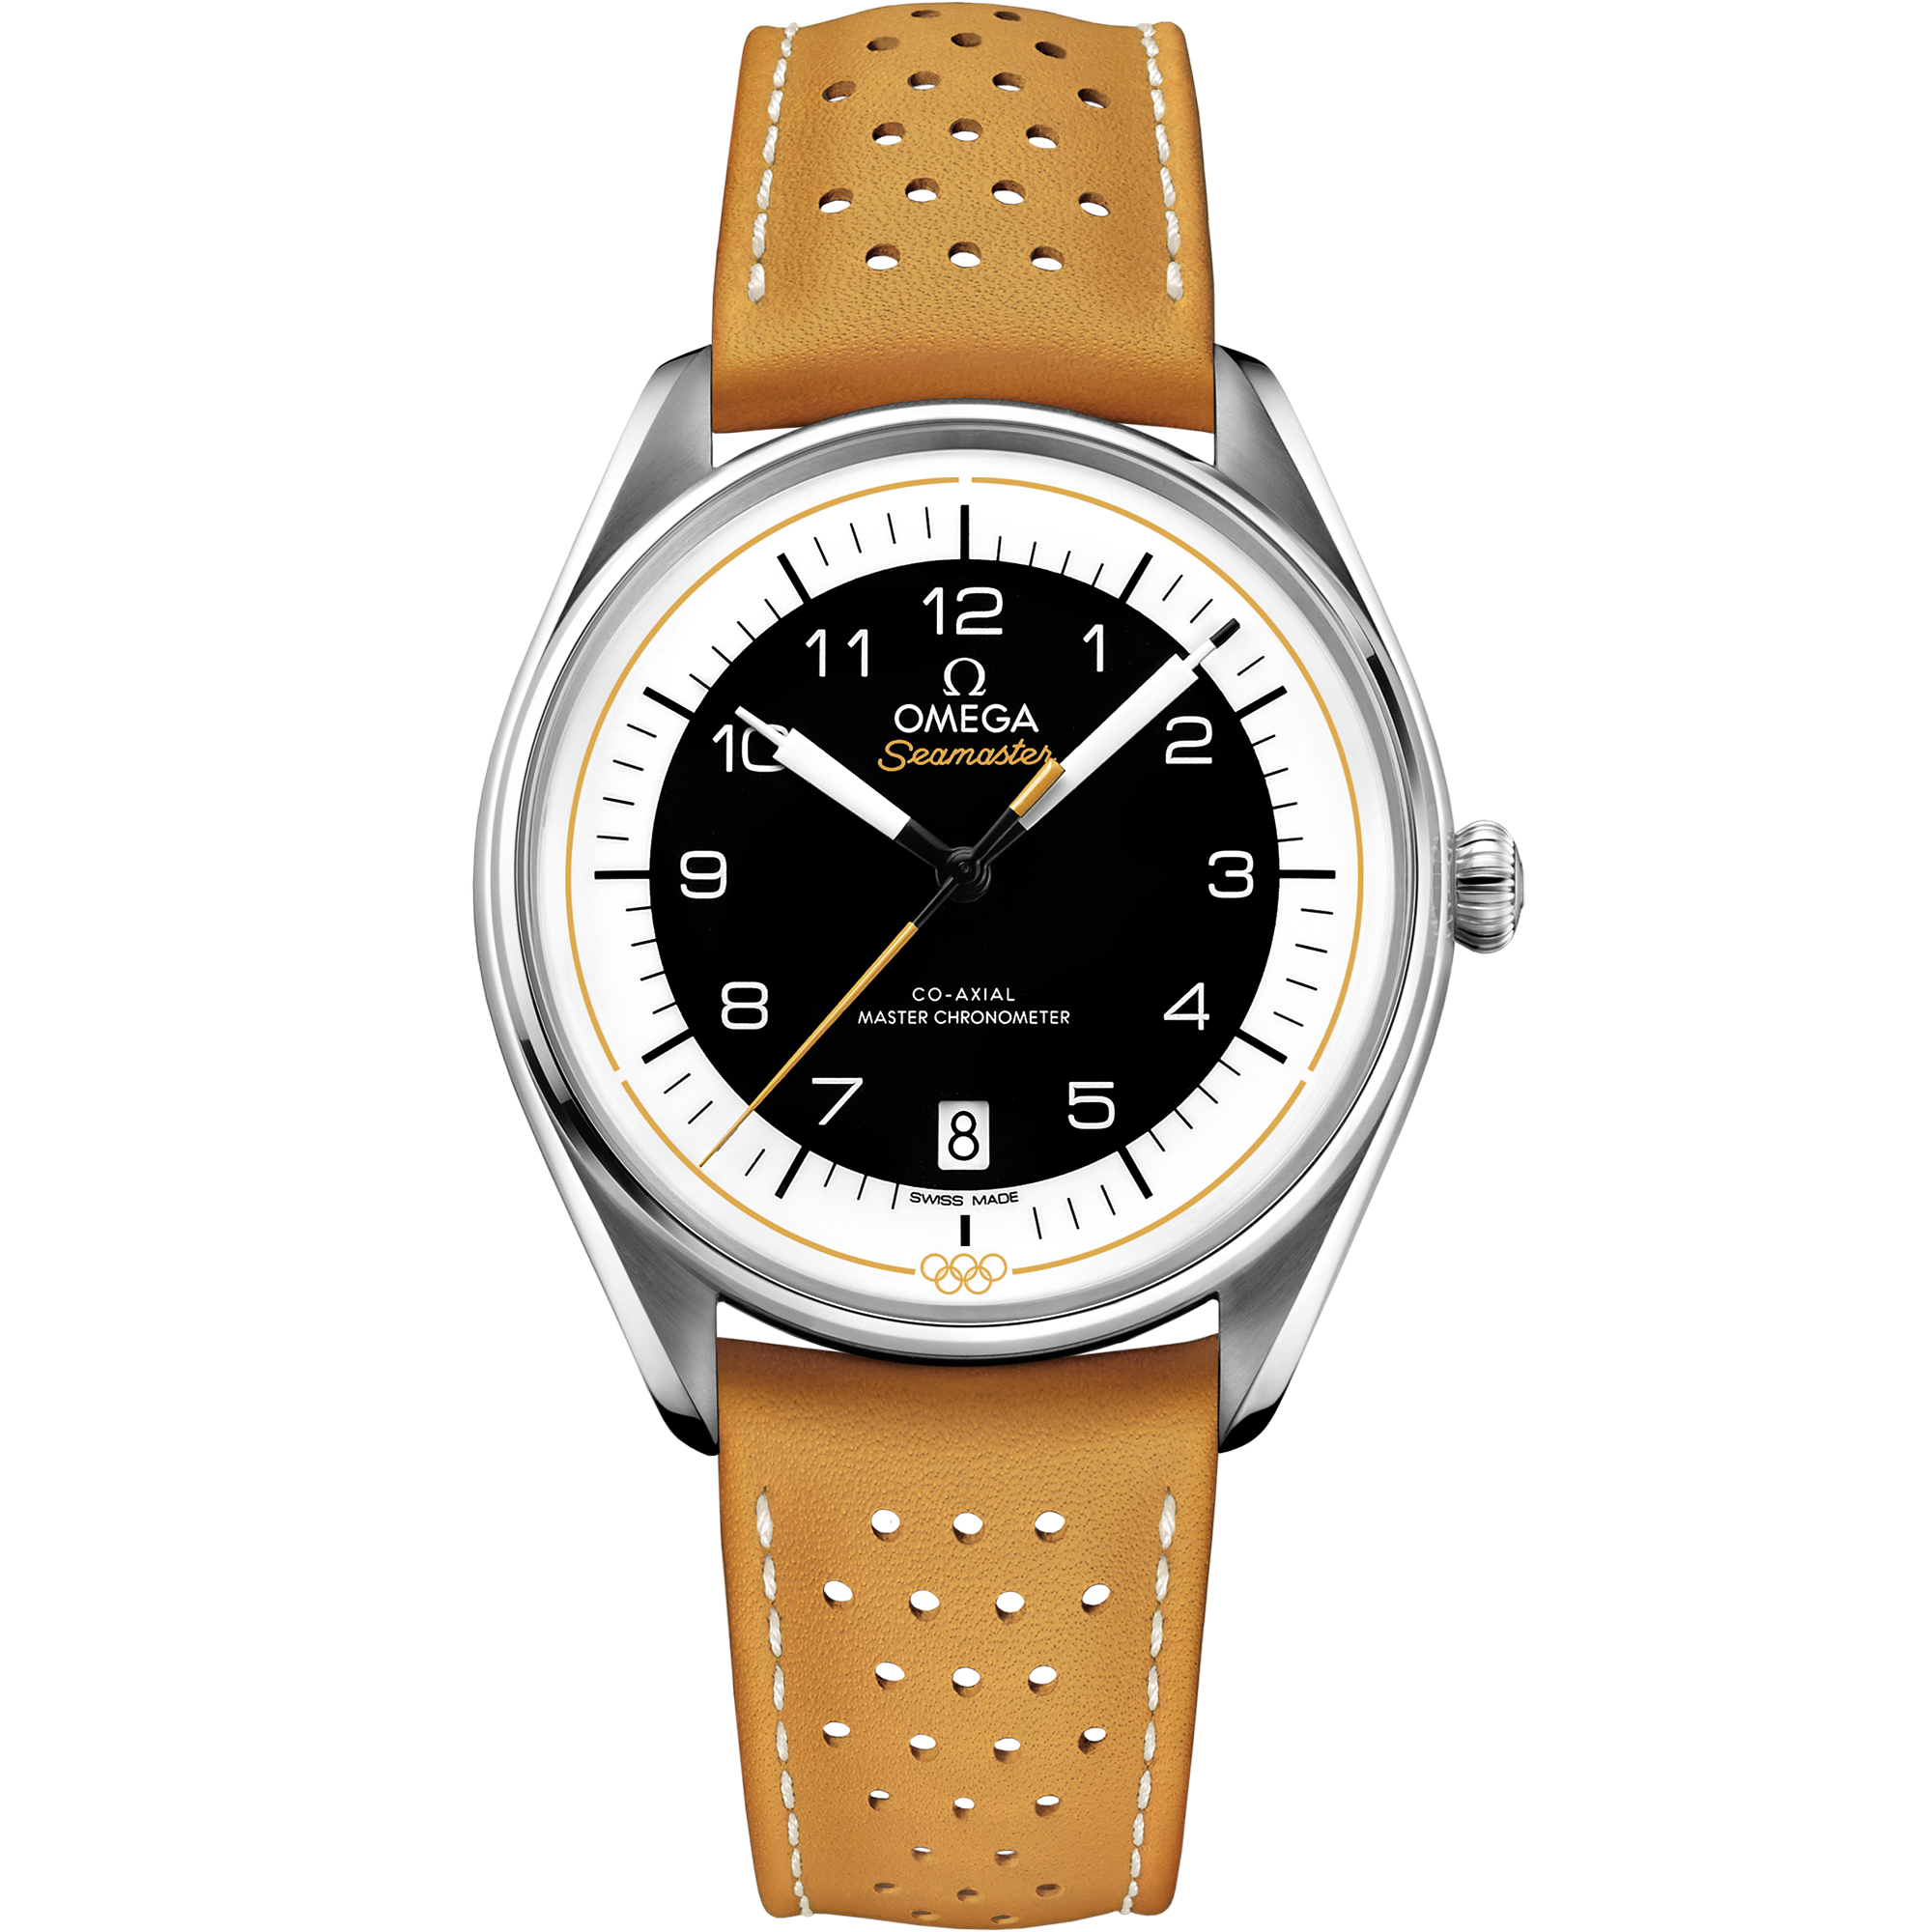 Seamaster 39.5 mm, steel on leather strap - 522.32.40.20.01.002